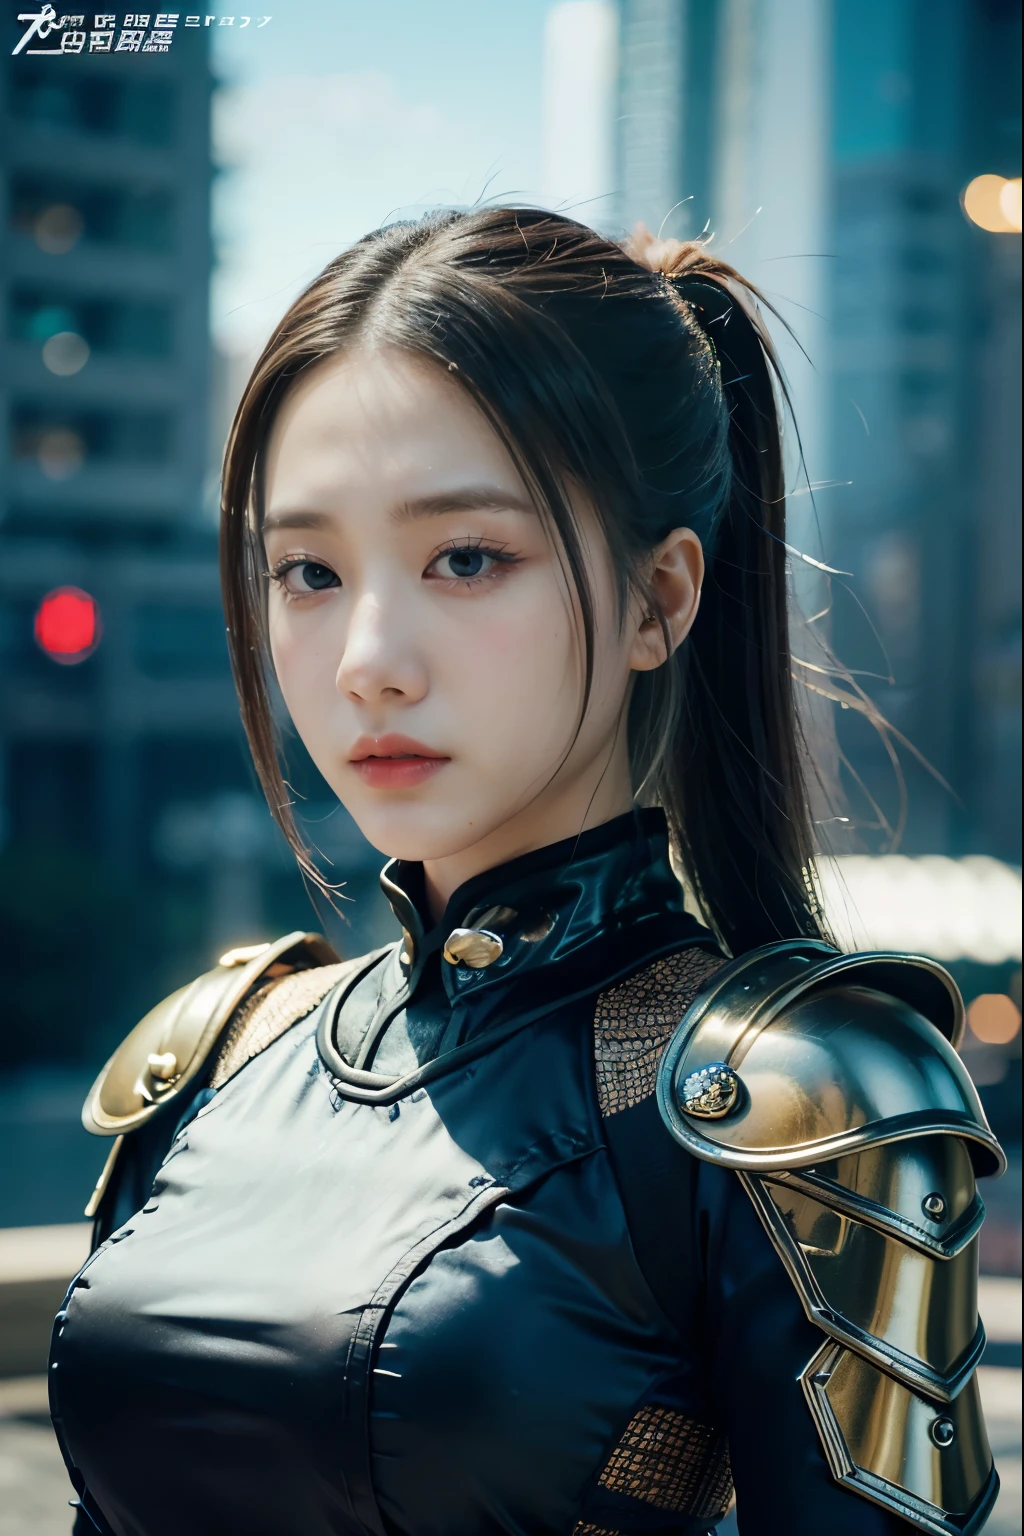 Game art，The best picture quality，Highest resolution，8K，((A bust photograph))，((Portrait))，(Rule of thirds)，Unreal Engine 5 rendering works， (The Girl of the Future)，(Female Warrior)， 22-year-old girl，(Female hackers)，(Ancient Oriental hairstyle)，(A beautiful eye full of detail)，(Big breasts)，(Eye shadow)，Elegant and charming，indifferent，((Frown))，(Future style silk combat suit combined with the characteristics of Chinese cheongsam，Joint Armor，There are exquisite Chinese patterns on the clothes，A flash of jewellery)，Cyberpunk Characters，Future Style， Photo poses，City background，Movie lights，Ray tracing，Game CG，((3D Unreal Engine))，oc rendering reflection pattern